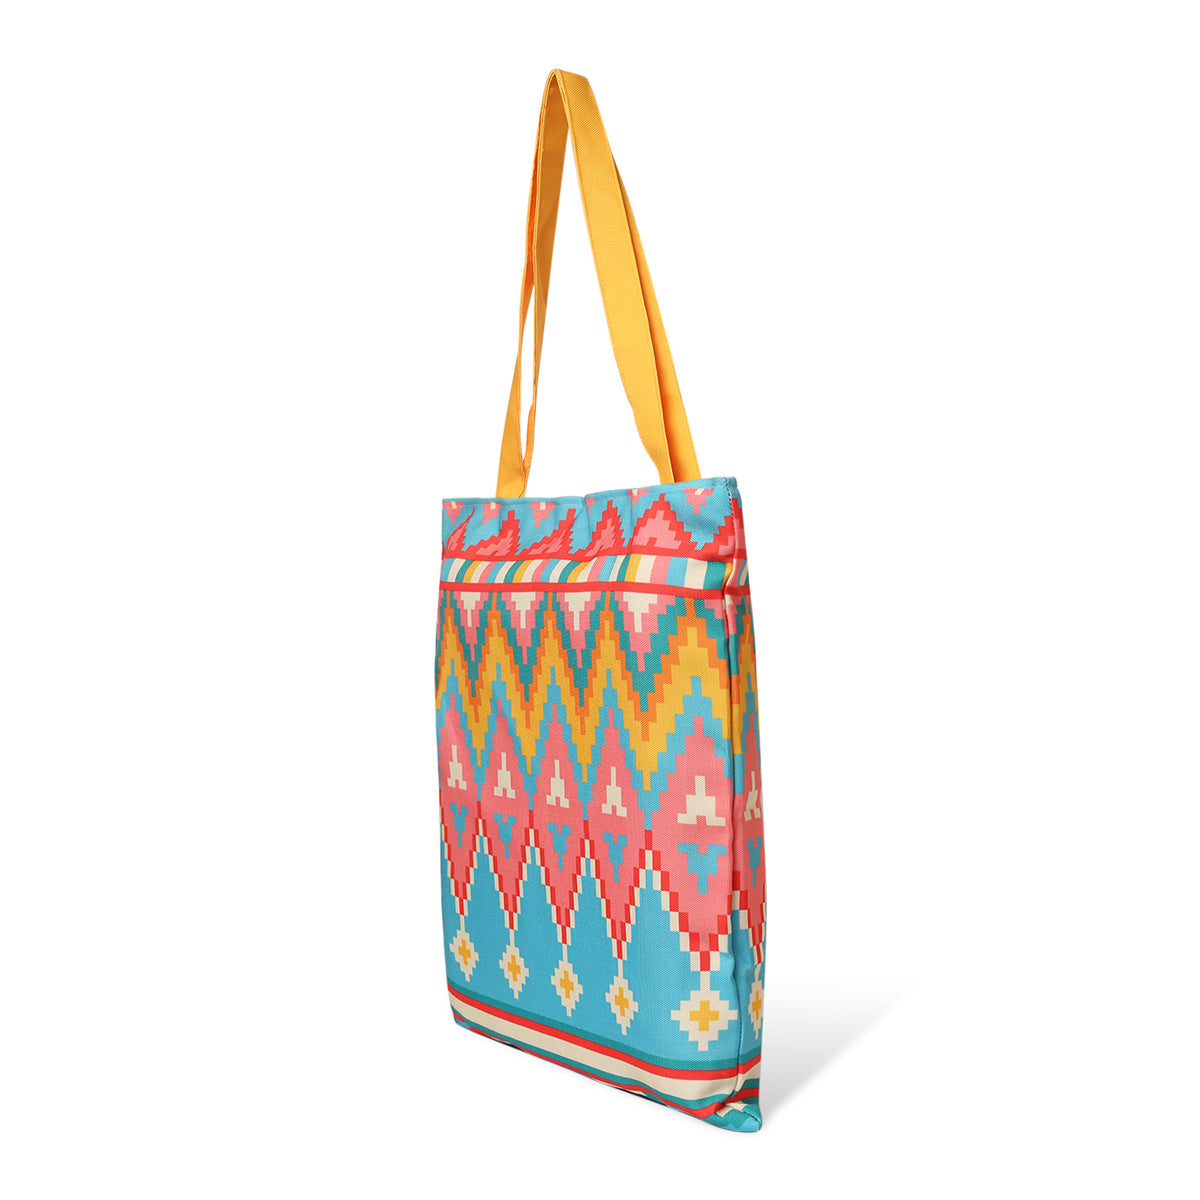 Bright tote bag with colorful shapes.